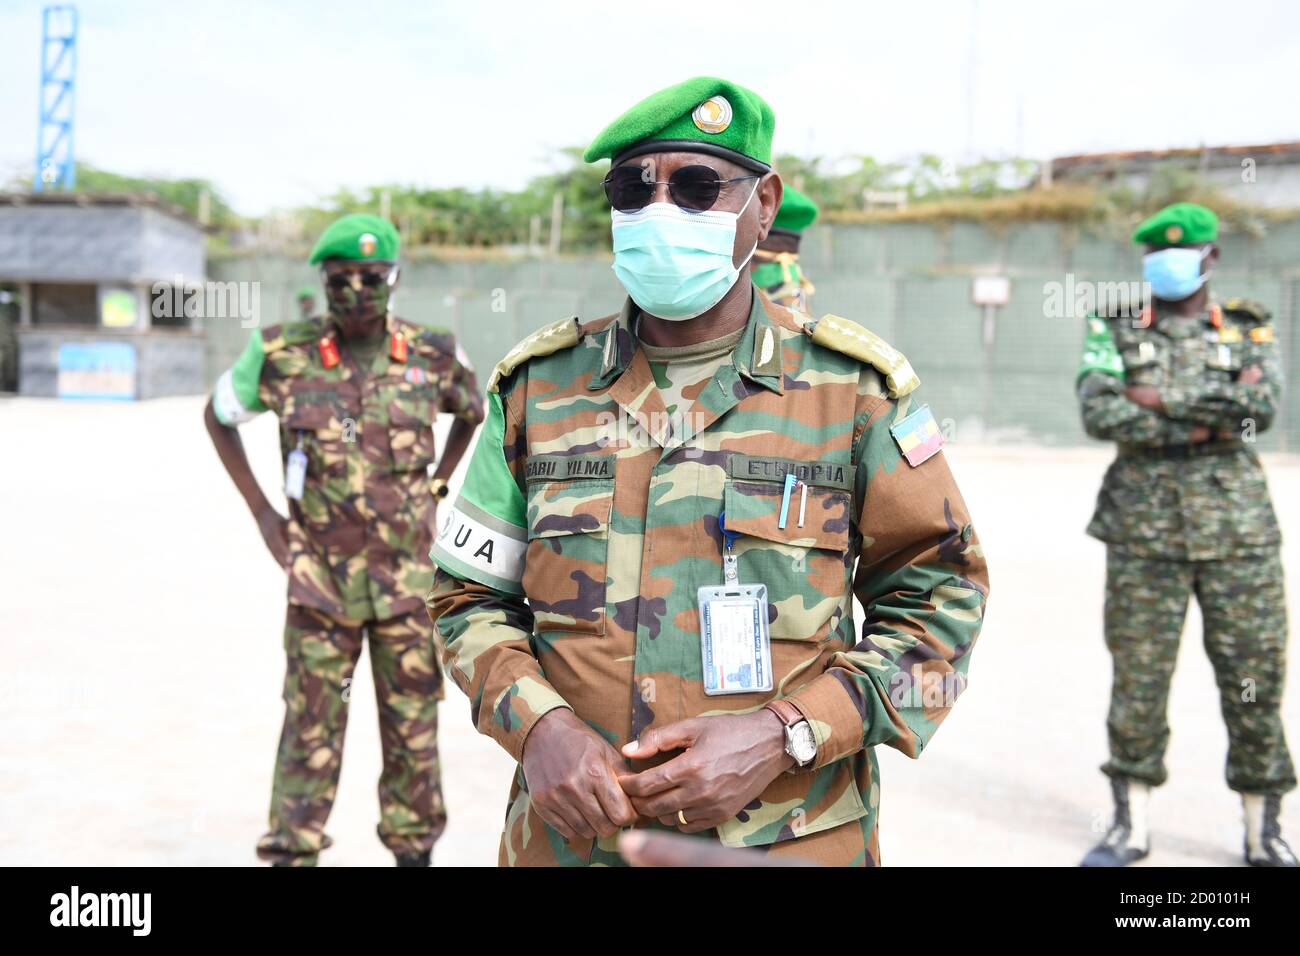 The Force Commander of the African Union Mission in Somalia (AMISOM) Lt. Gen. Tigabu Yilma, addresses AMISOM Military Staff Officers during a medal parade at the Force Headquarters in Mogadishu, Somalia on 25 August 2020. Stock Photo